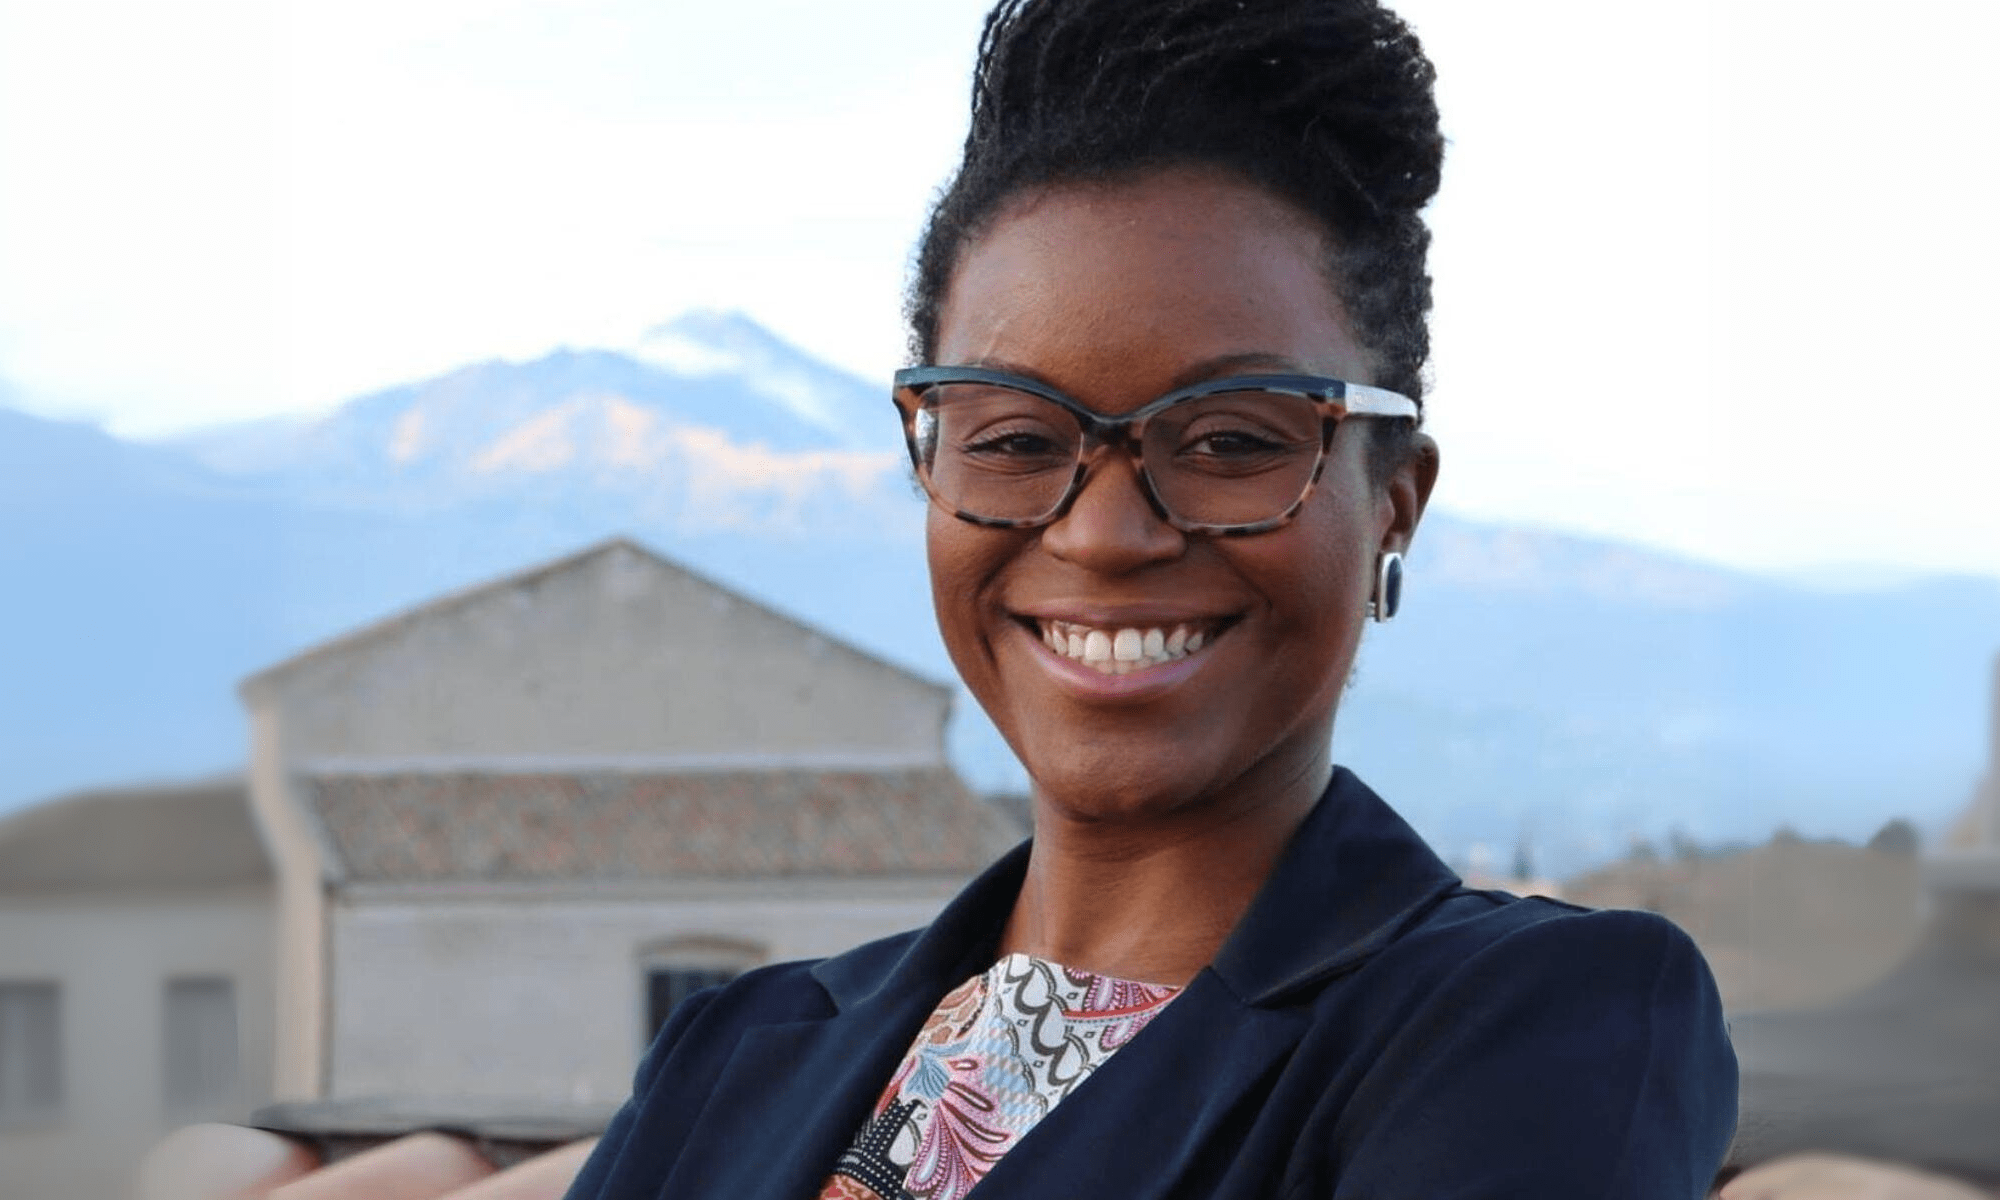 For Treshina Smith, the M.S. in Project Management offered the global perspective and focus on data analytics that she was looking for. (Photo: Treshina Smith)